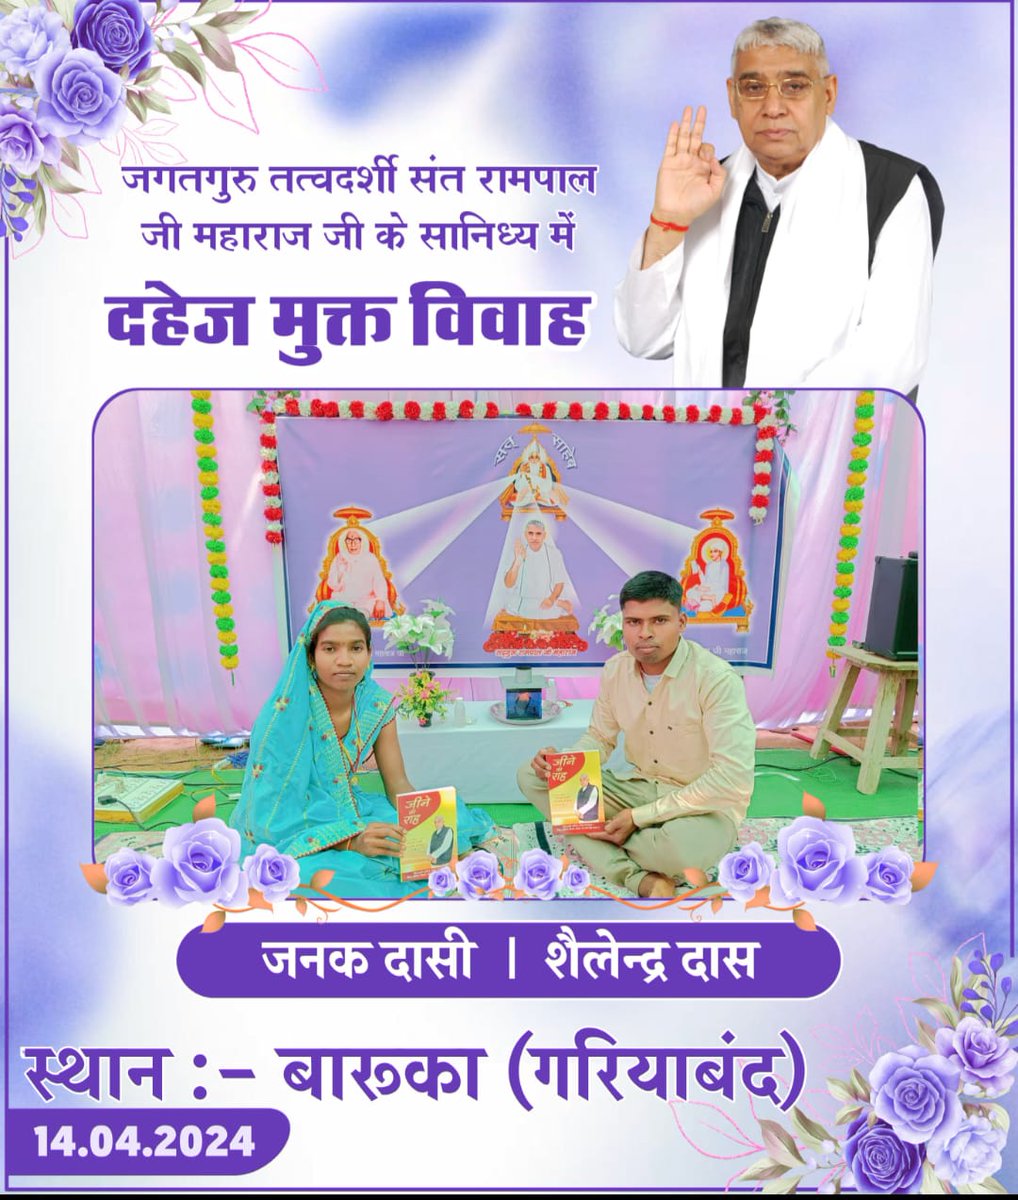 'Let's break the cycle of greed & embrace the beauty of love! 💖 Say no to dowry & yes to a #DowryFreeIndia, inspired by Saint Rampal Ji Maharaj's message of equality & love. 💕 #दहेज_मुक्त_विवाह #LoveOverDowry'